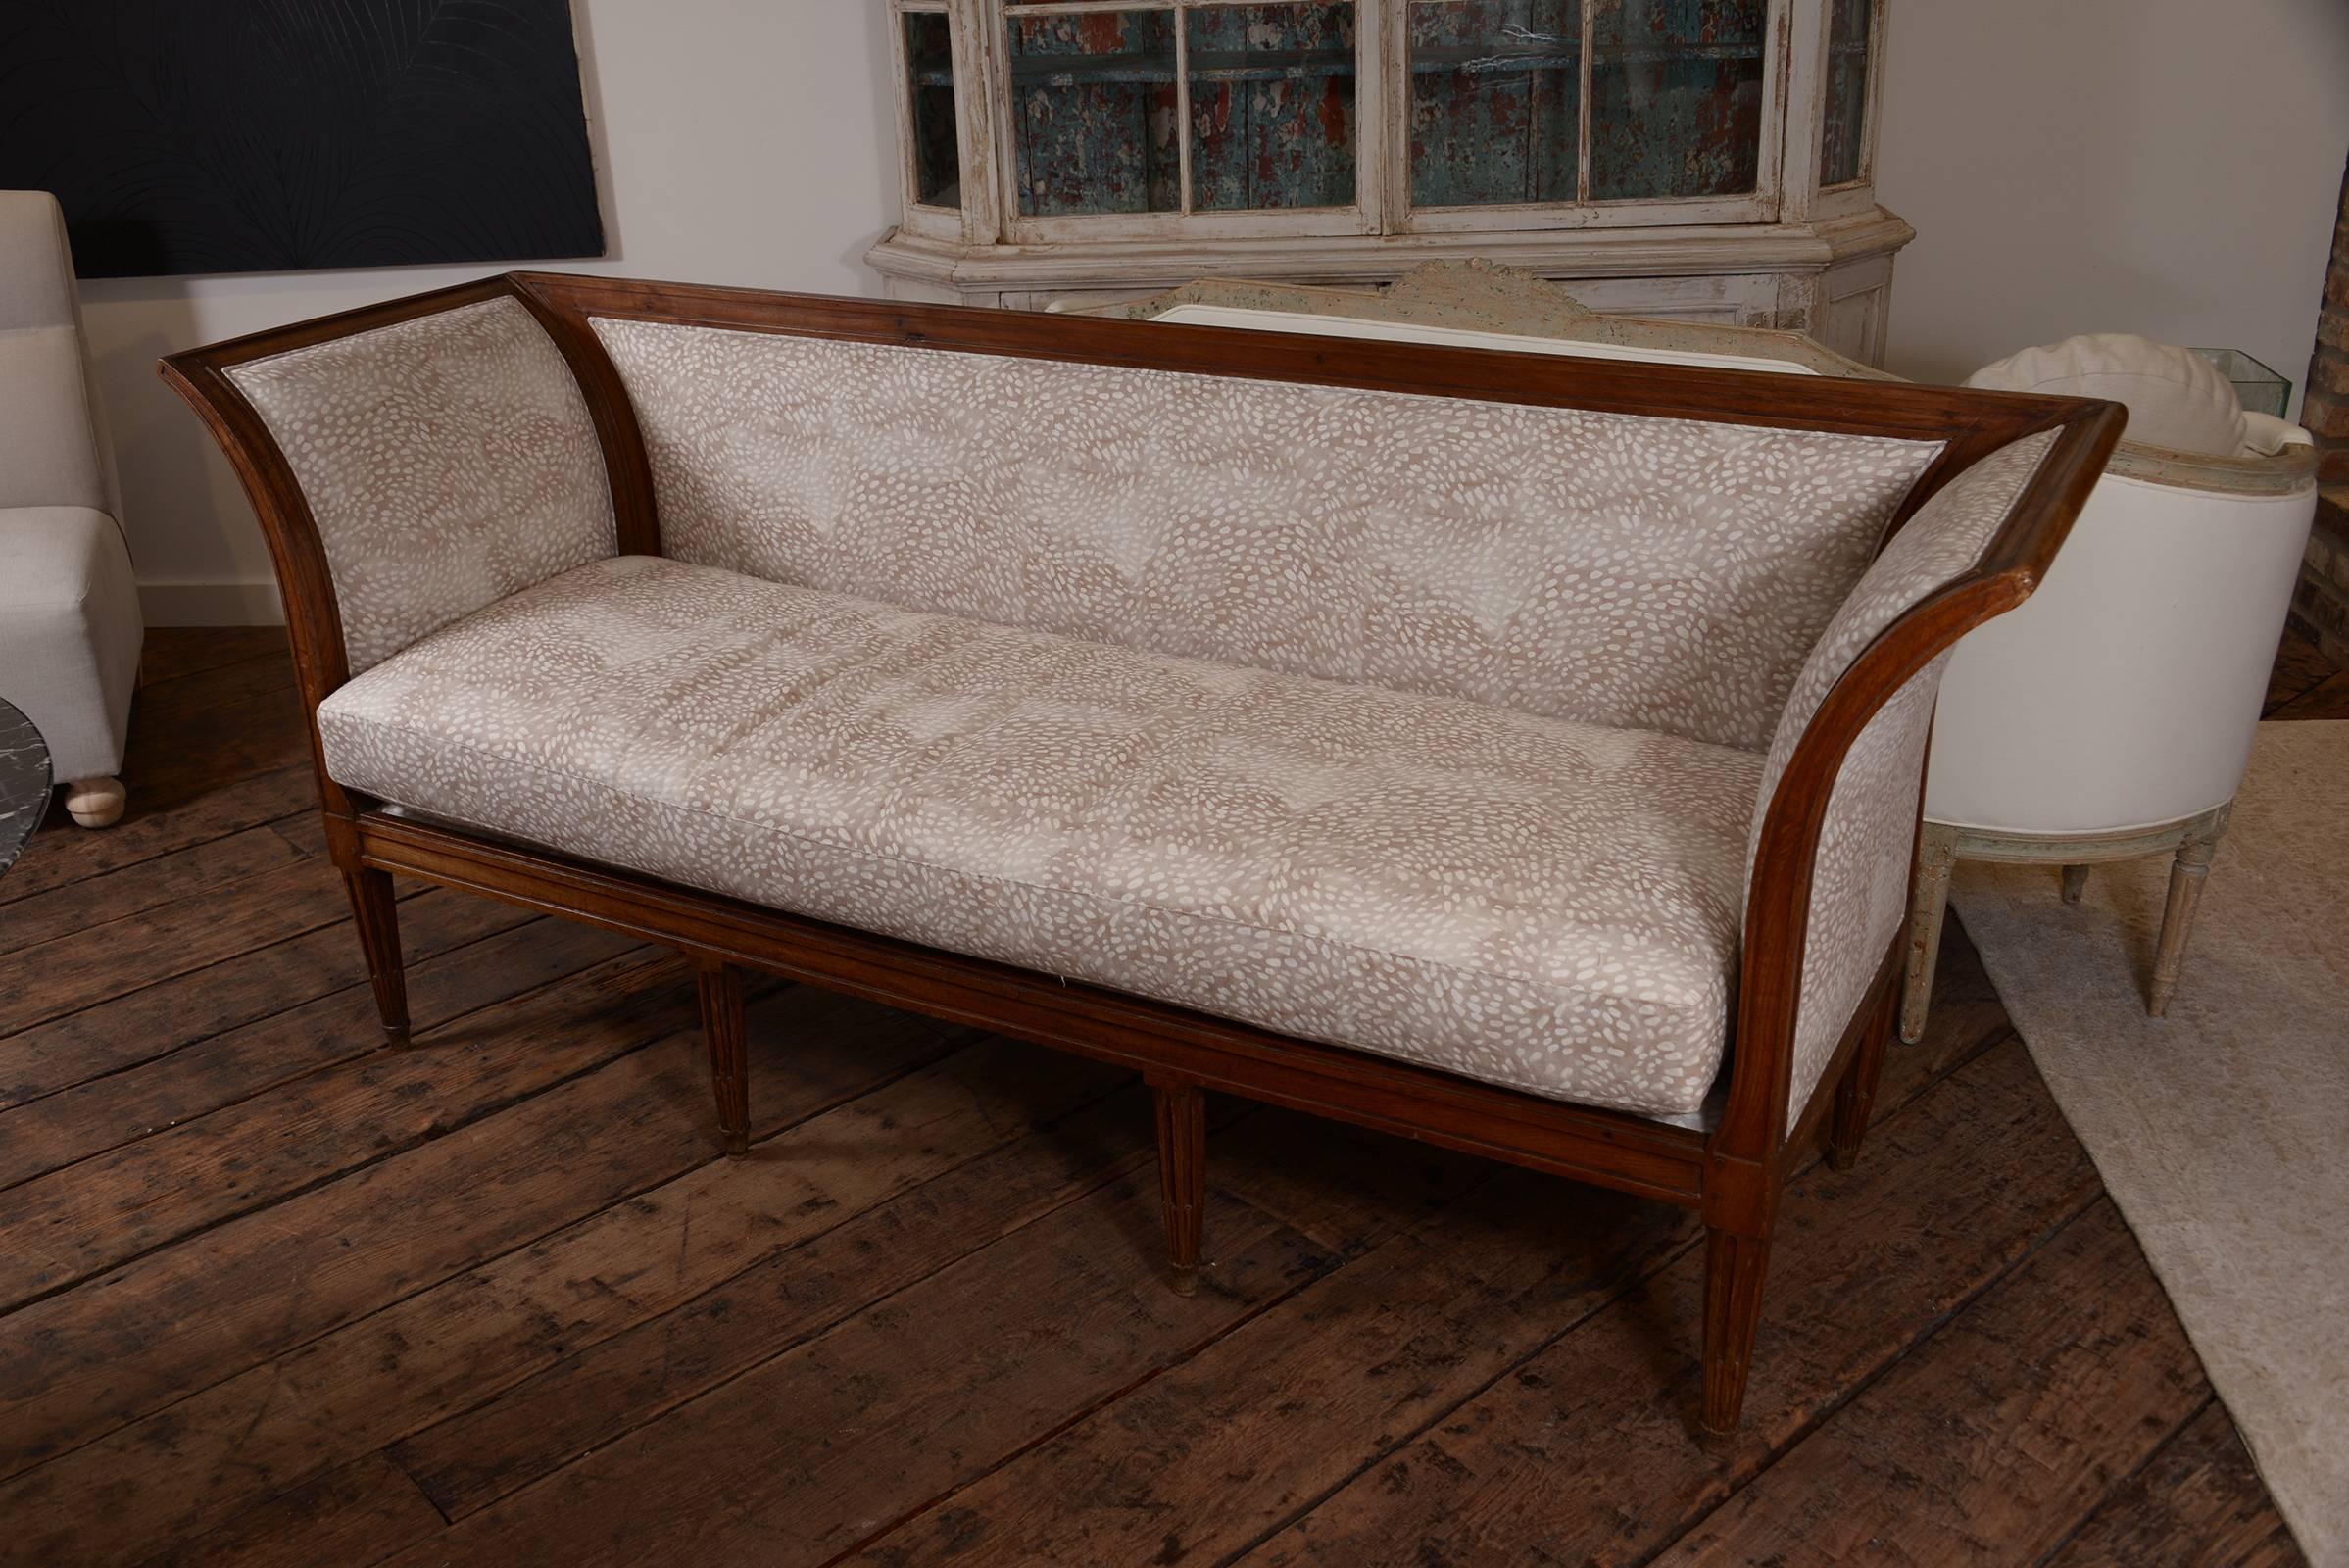 Beautiful 18th century English sofa with beautiful curved arm. Upholstered in Rebecca Atwood fabric gives it a modern twist. Could float in a room.

 